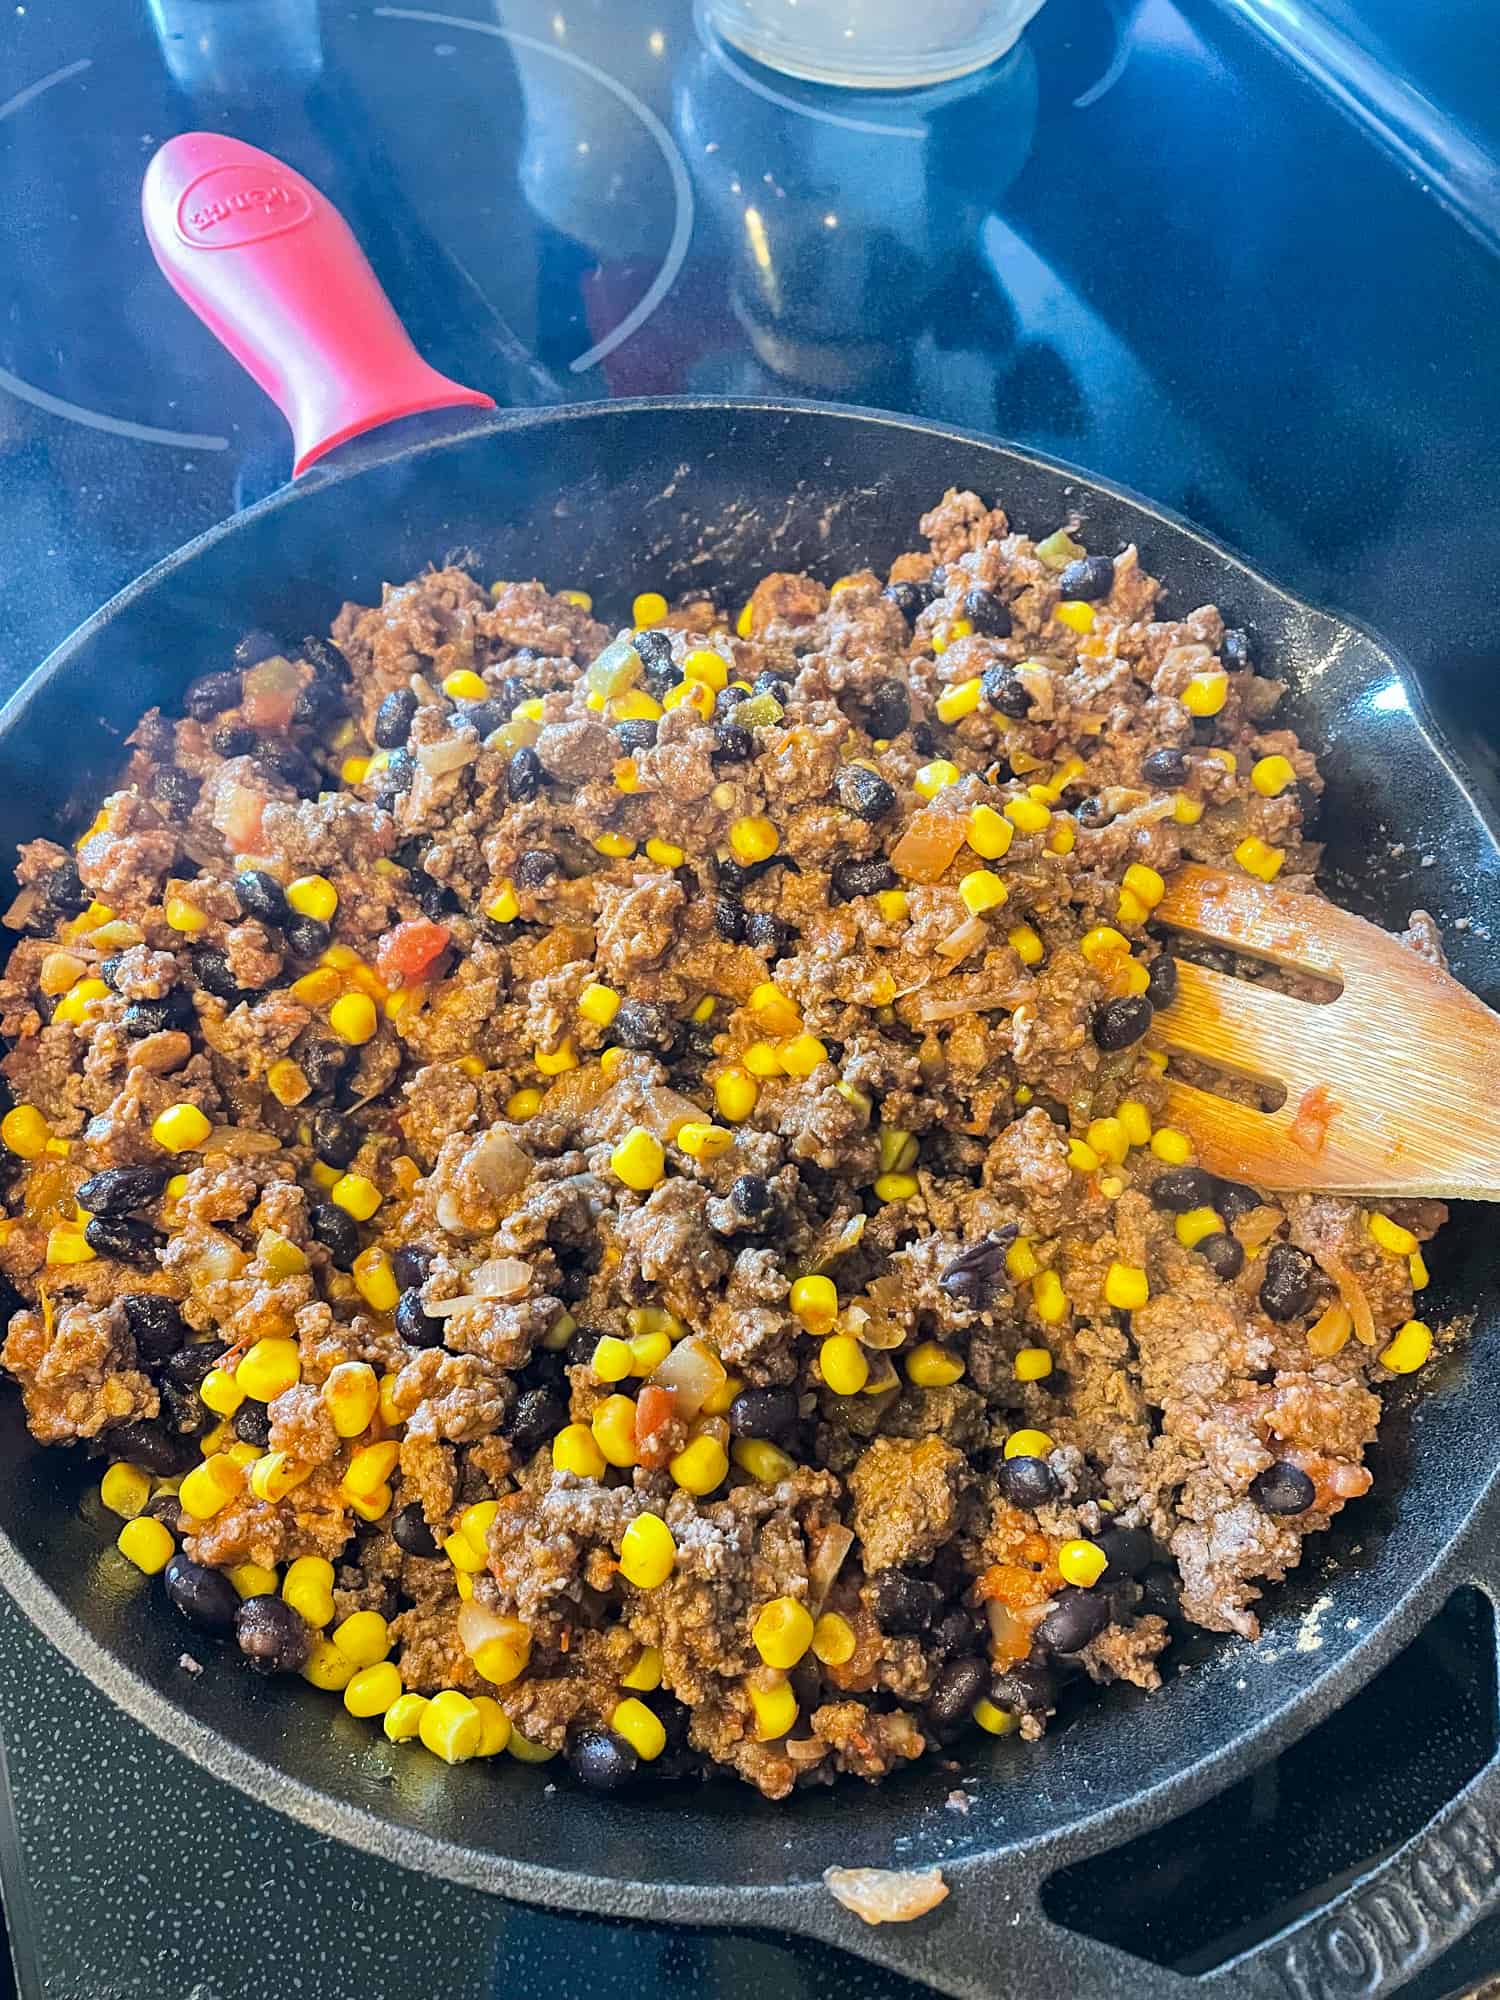 Mixture for beef quesadillas in a cast iron skillet.